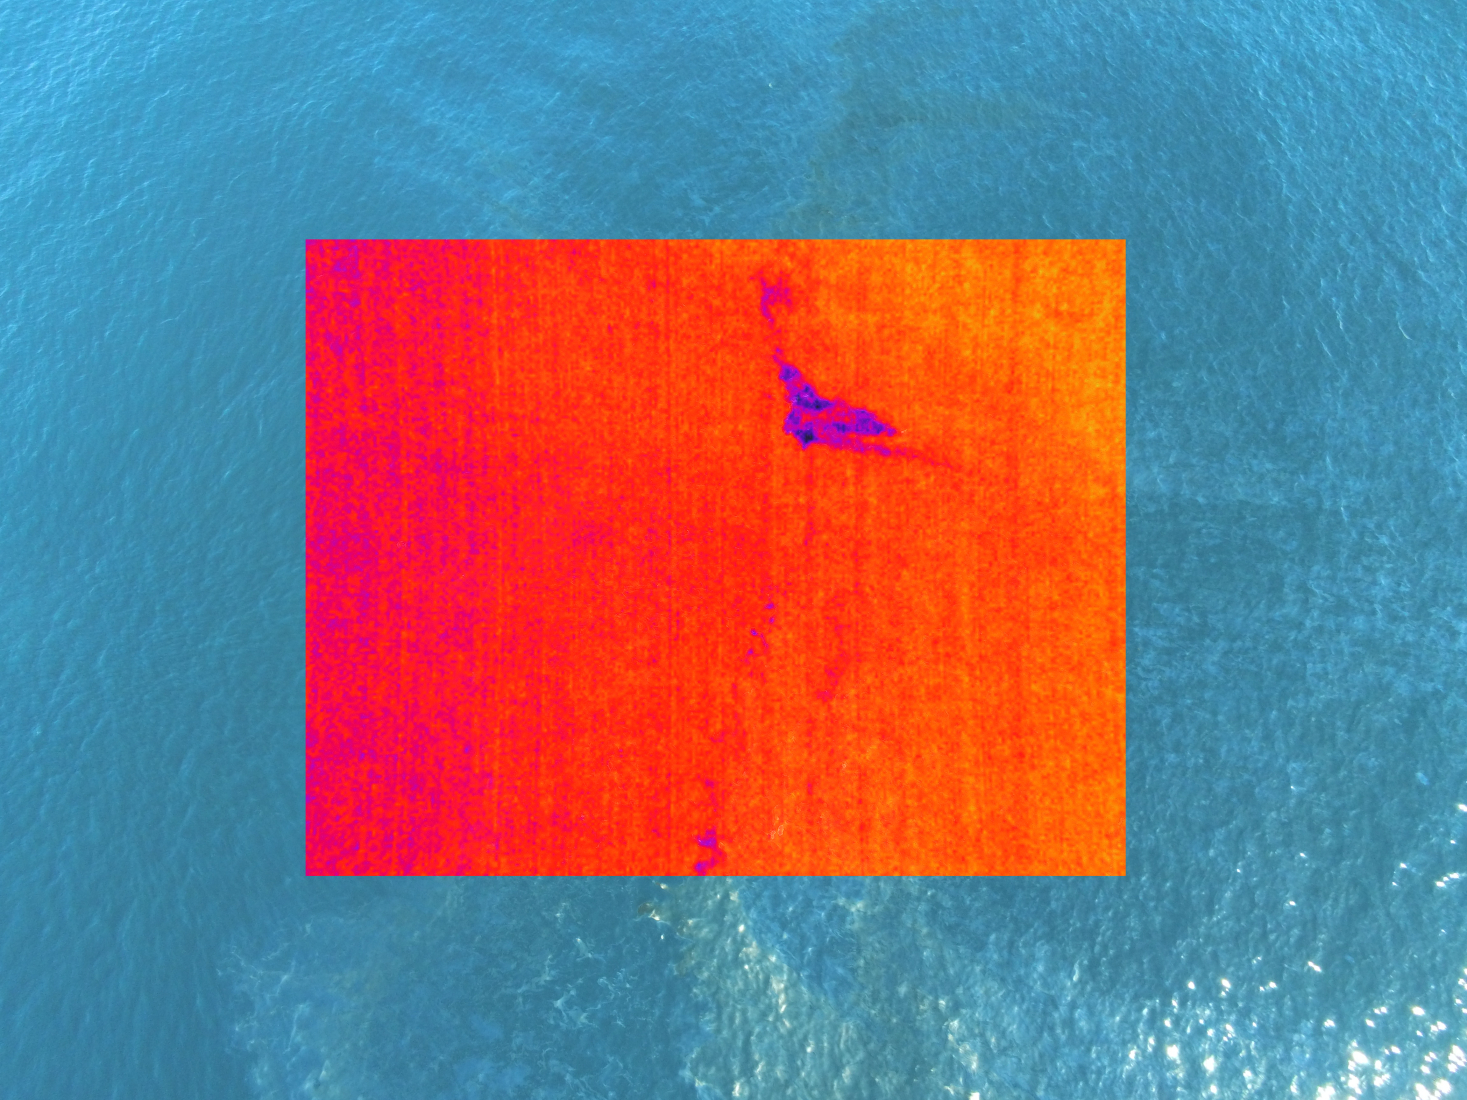  Thermal imagery of the aerial view of oil on water from a Parrot drone. Note: the oil appears purple due to a different thermal signature from the surrounding water. 